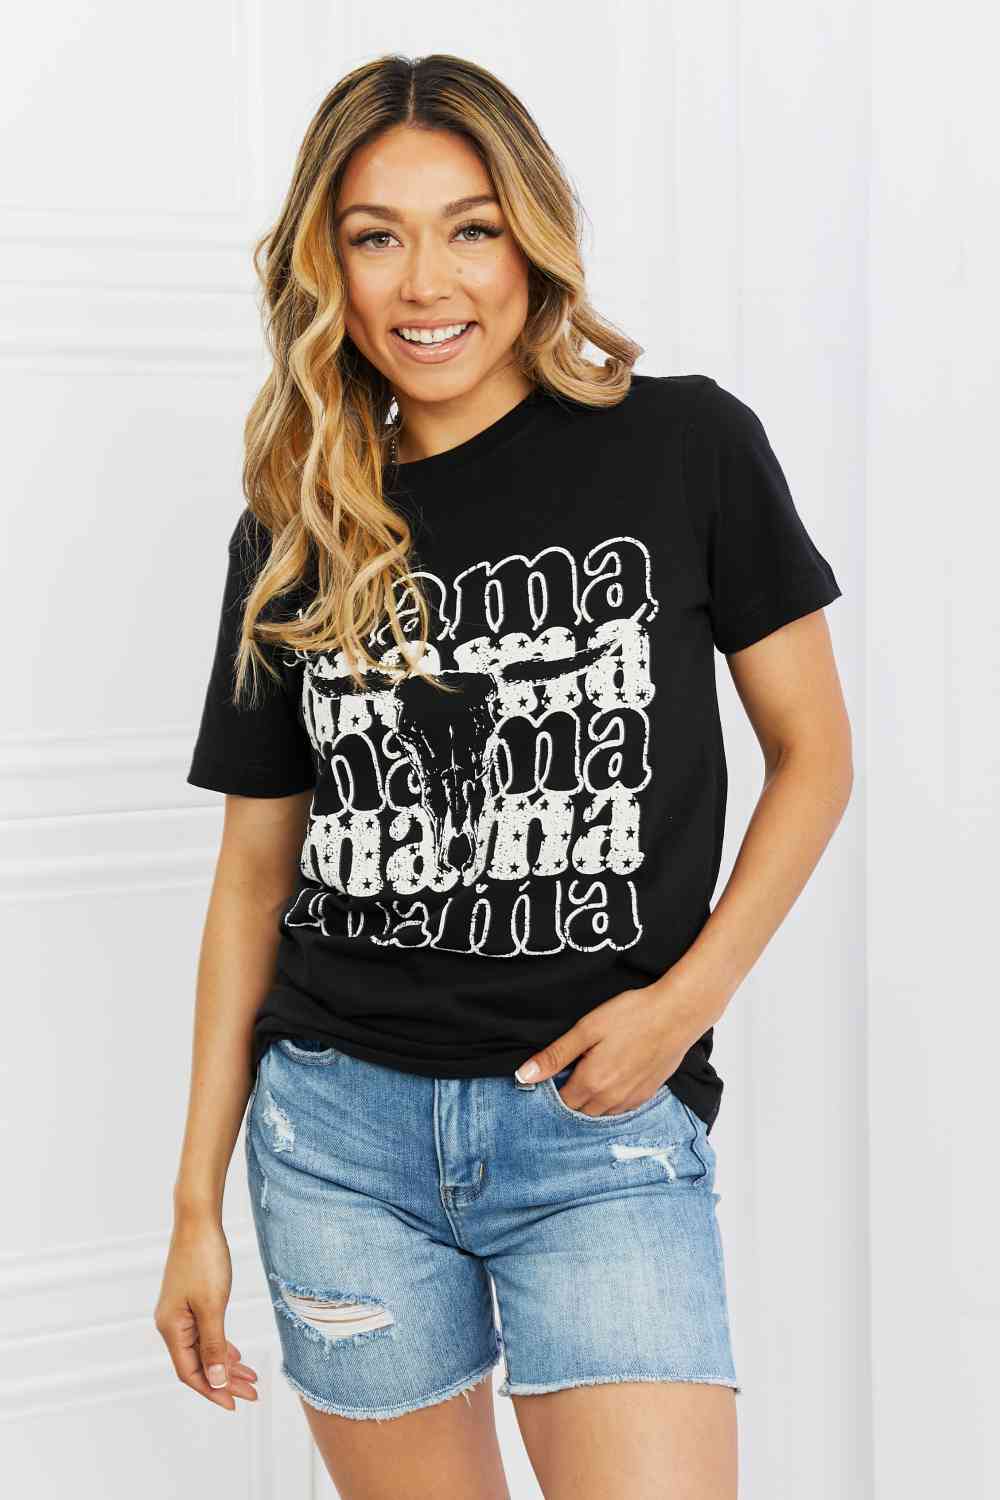 Mama Full Size Graphic Tee in Black